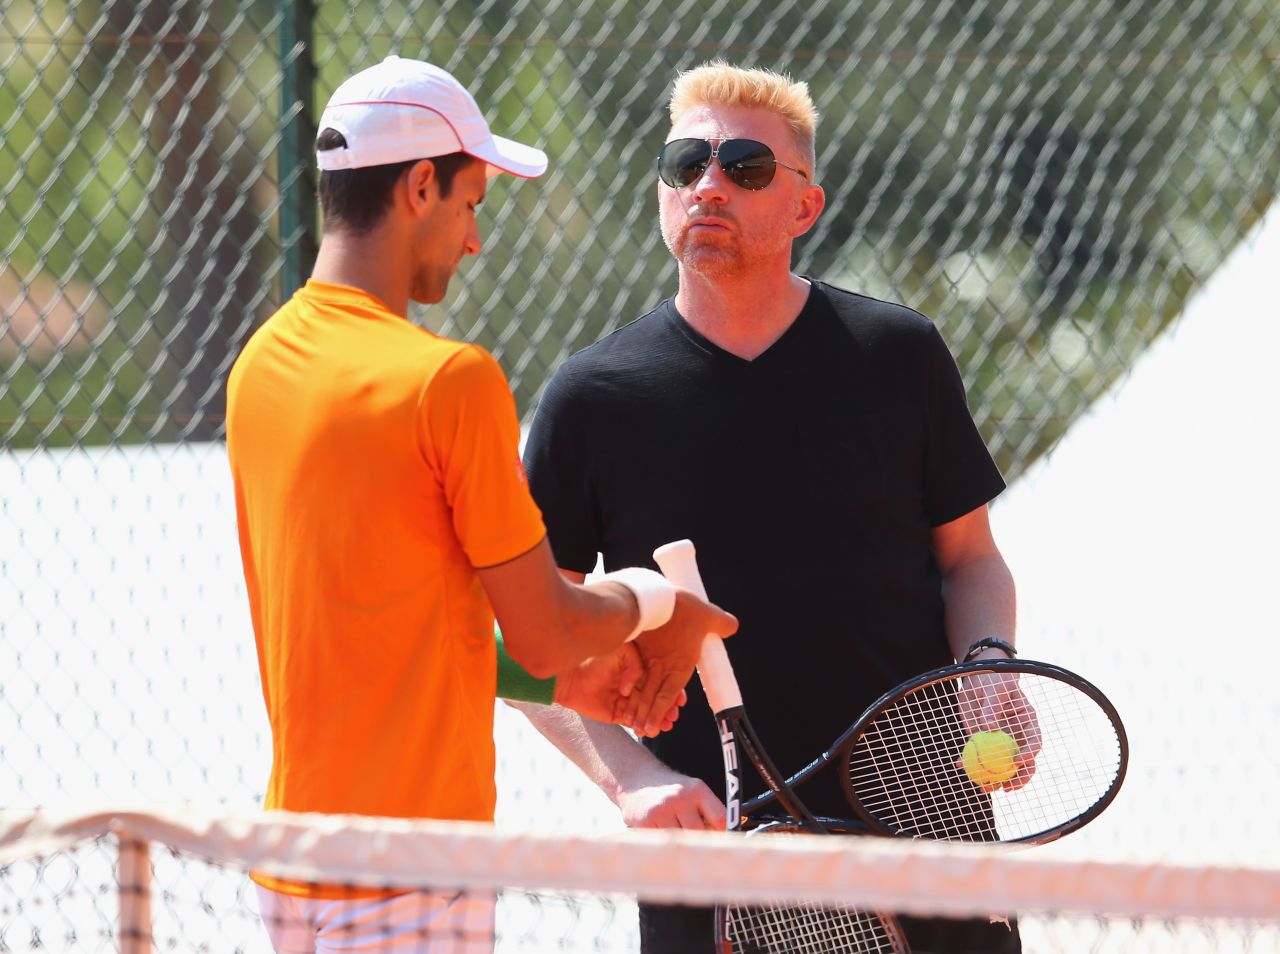 Becker, who won six grand slam titles during his illustrious playing career, started working with Djokovic ahead of January's Australian Open -- where the Serbian lost in the quarterfinals.